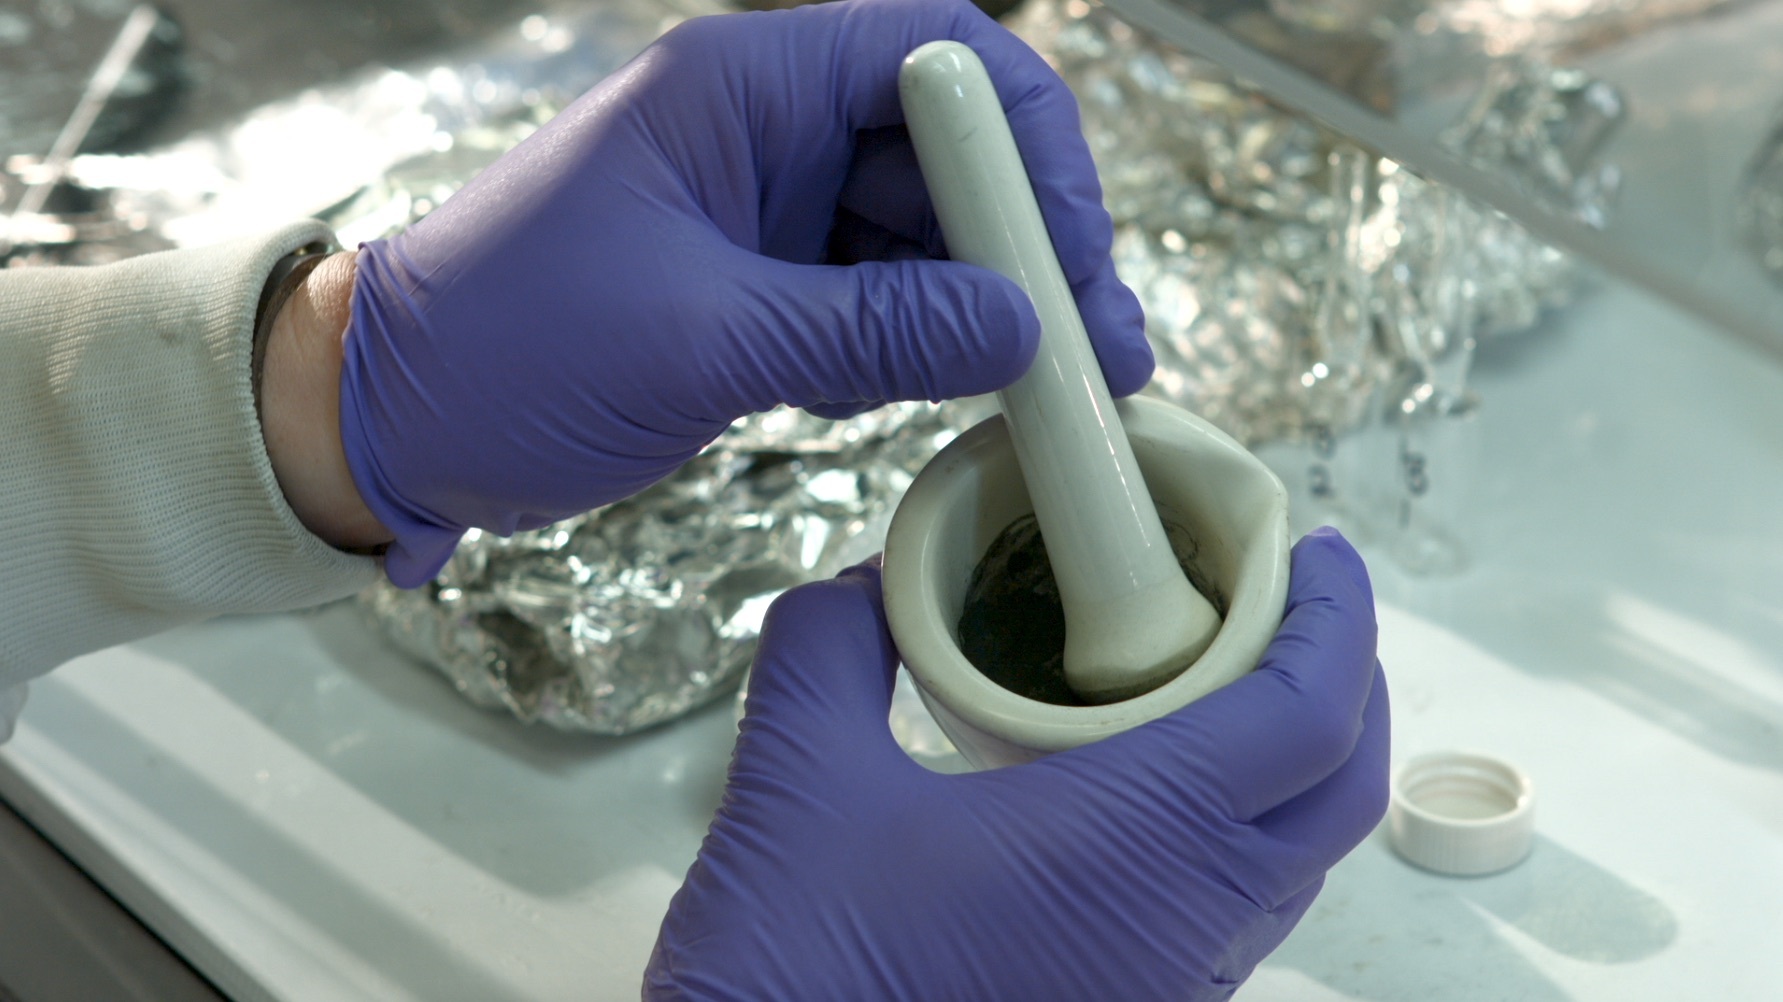 Grinding a sample with mortar and pestle.